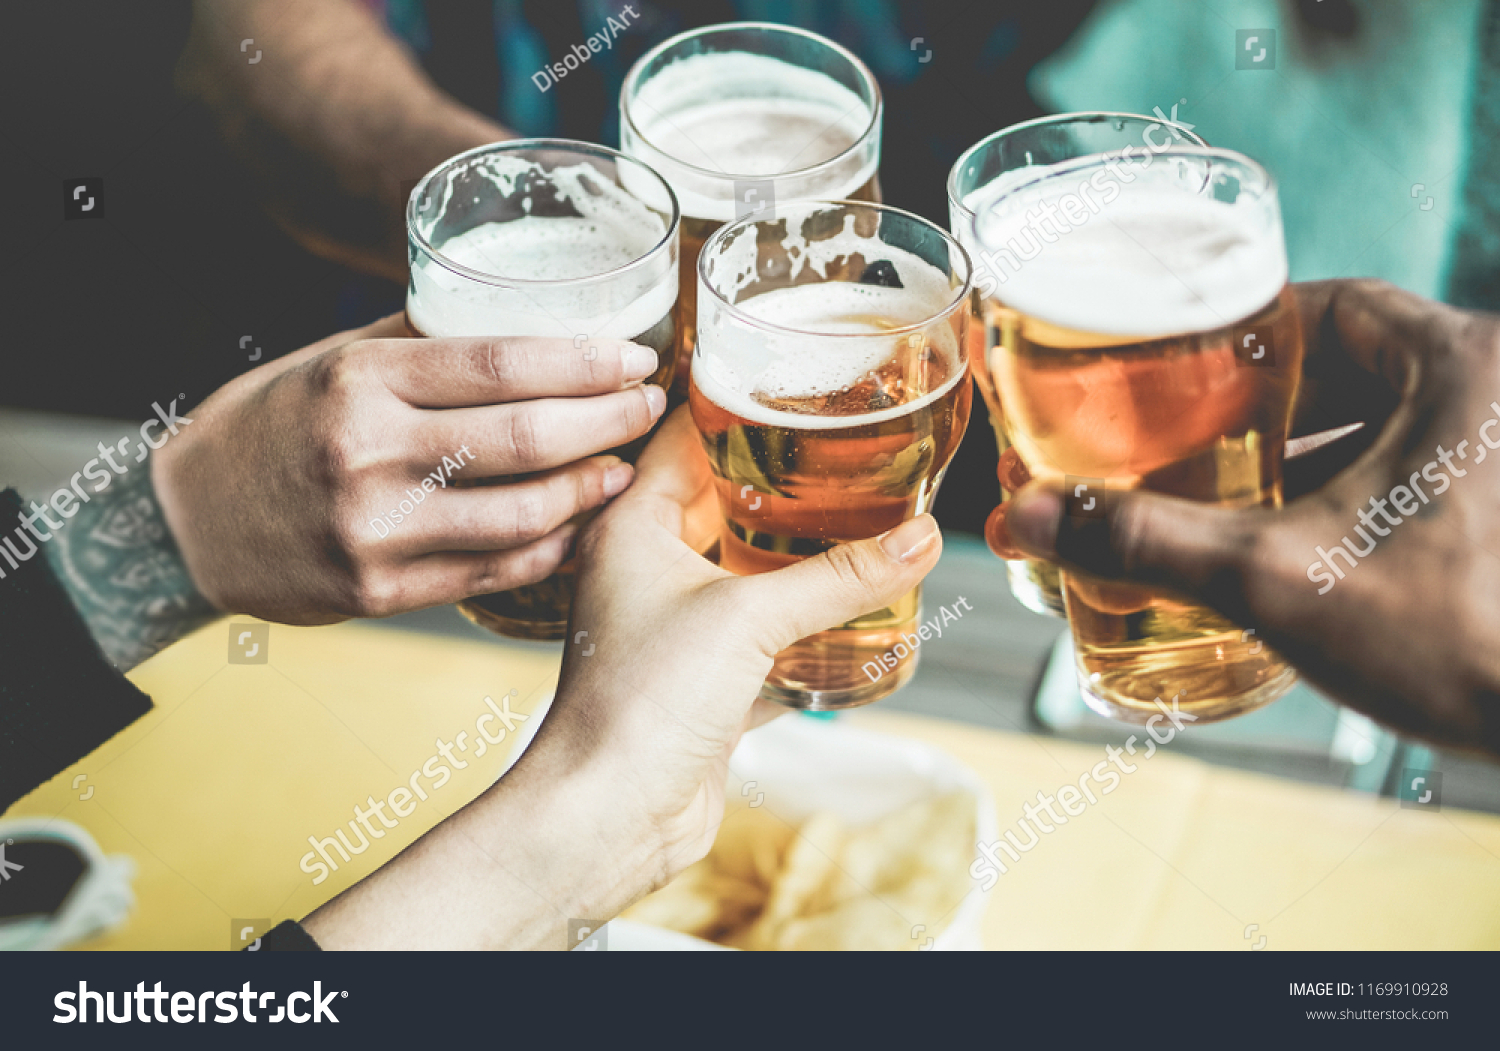 Group of friends enjoying a beer in brewery pub - Young people hands cheering at bar restaurant - Friendship and youth concept - Main focus on left bottom hands #1169910928